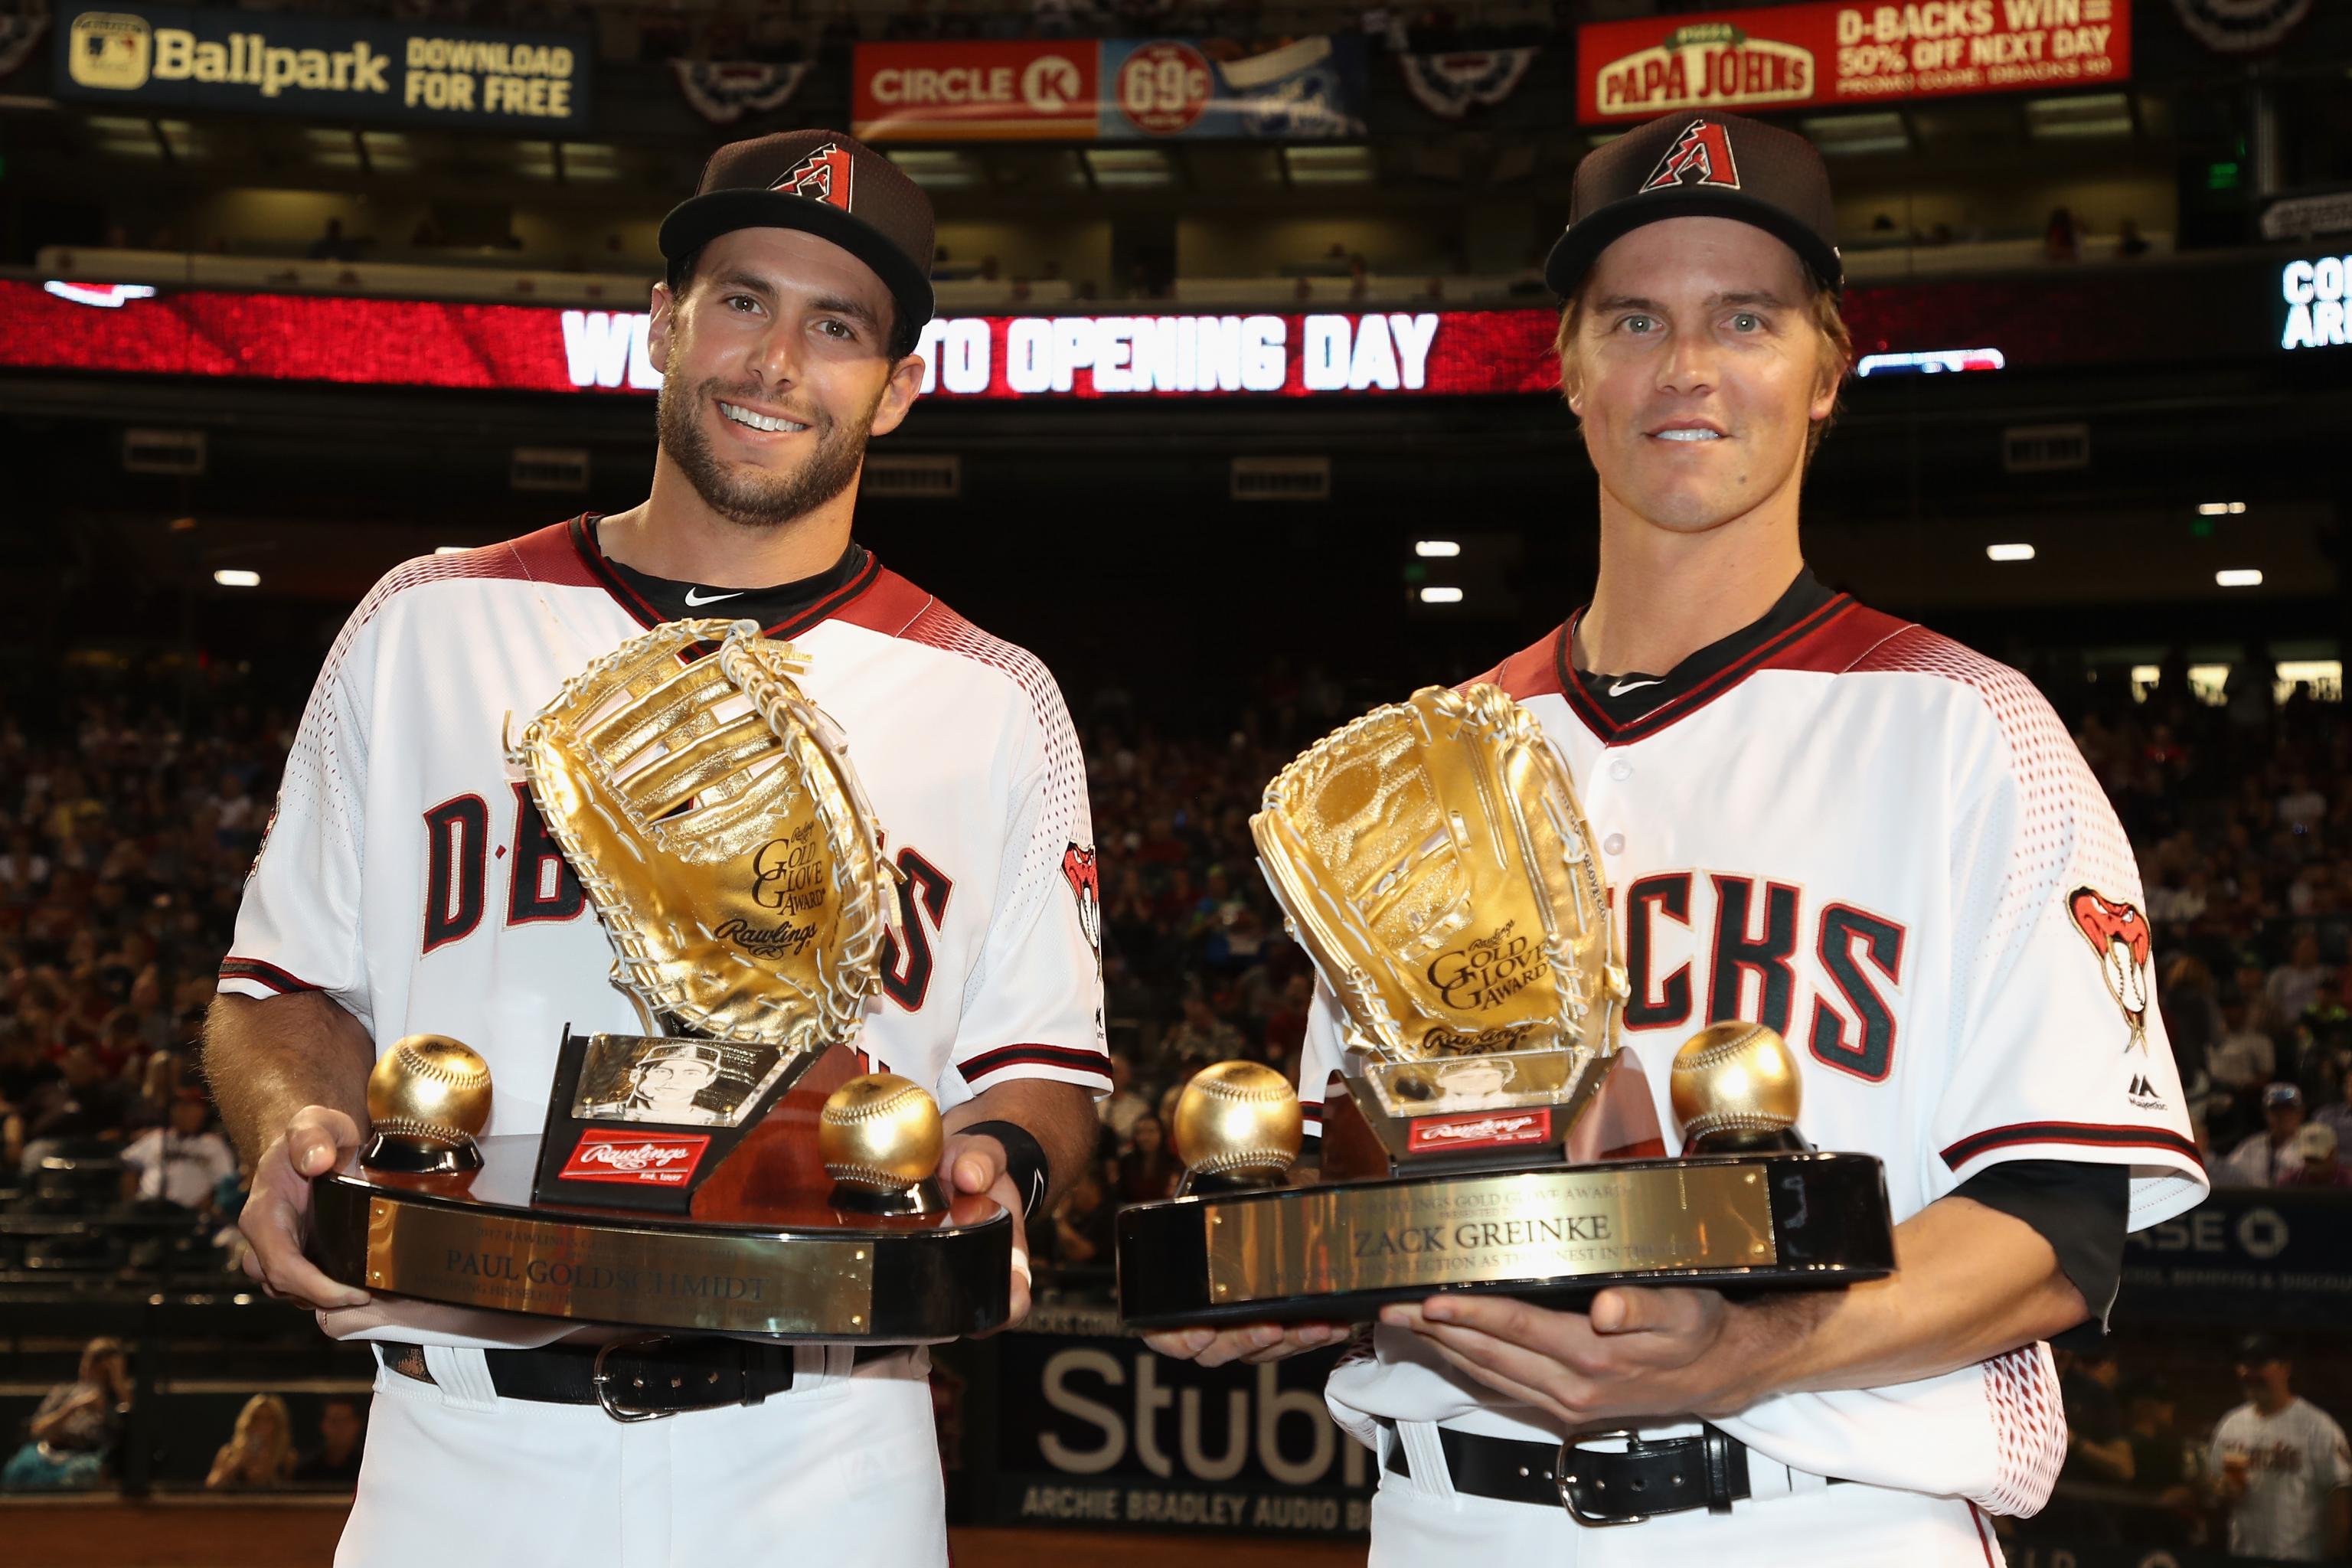 As Zack Greinke moves on, he fulfilled his part of Astros' blockbuster deal